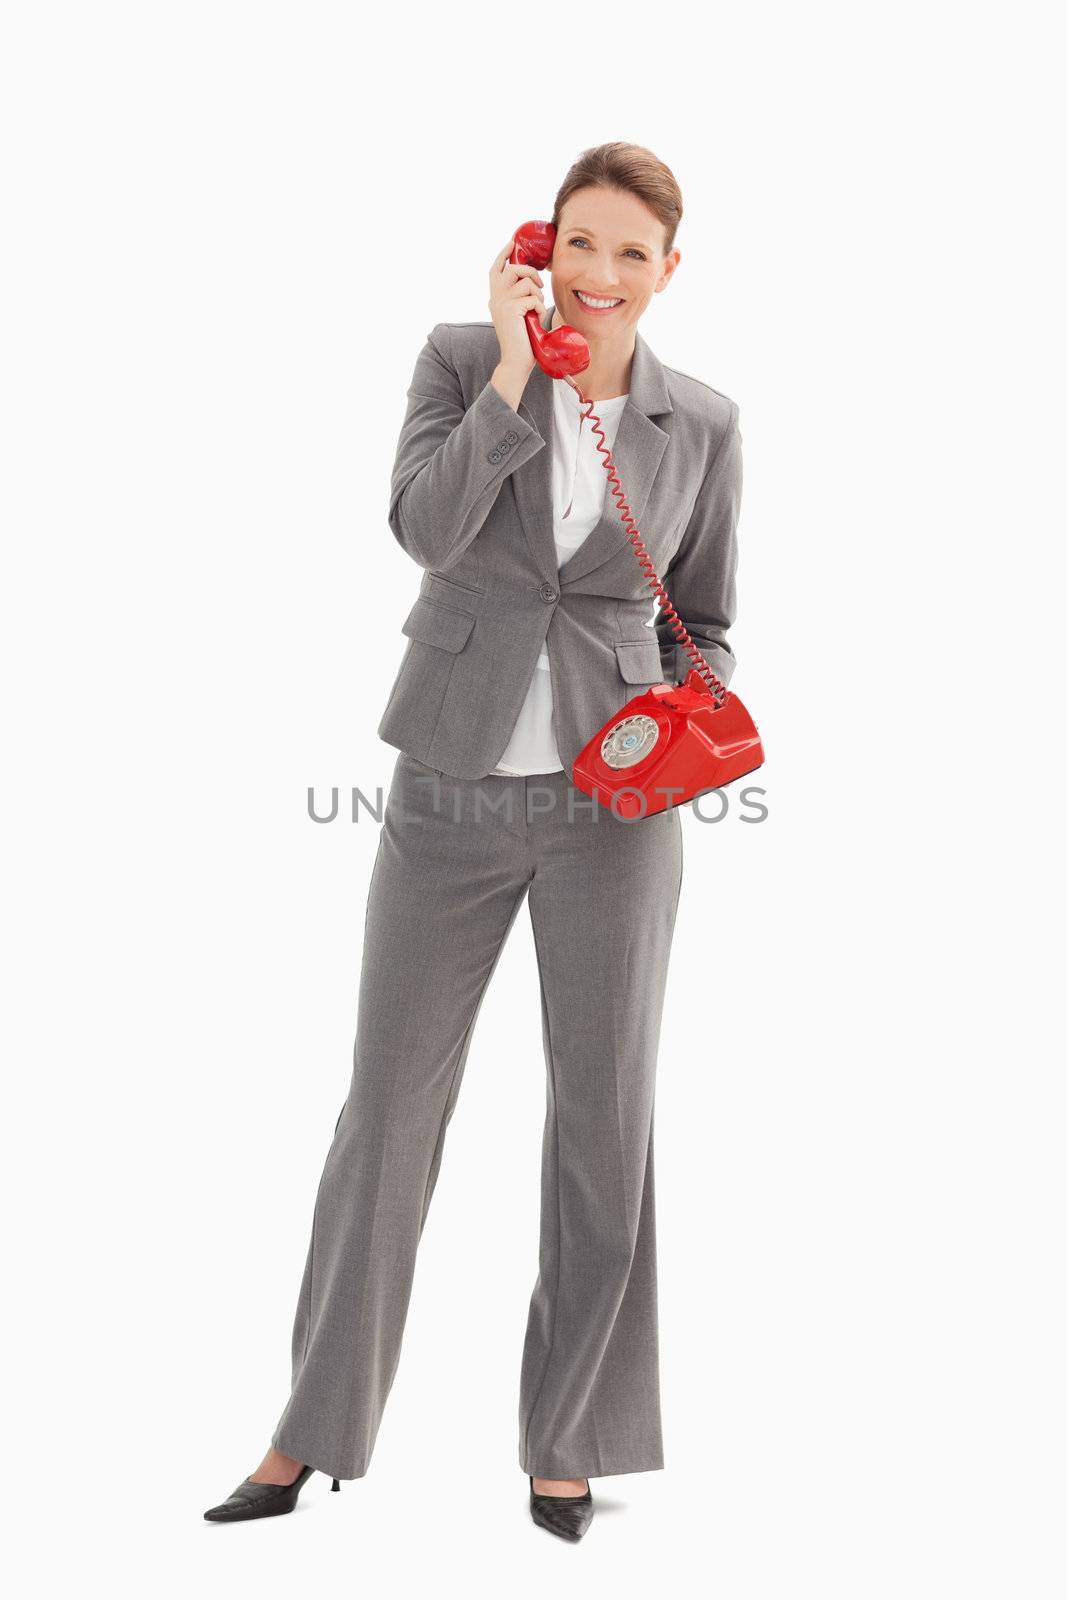 A businesswoman is talking on the phone